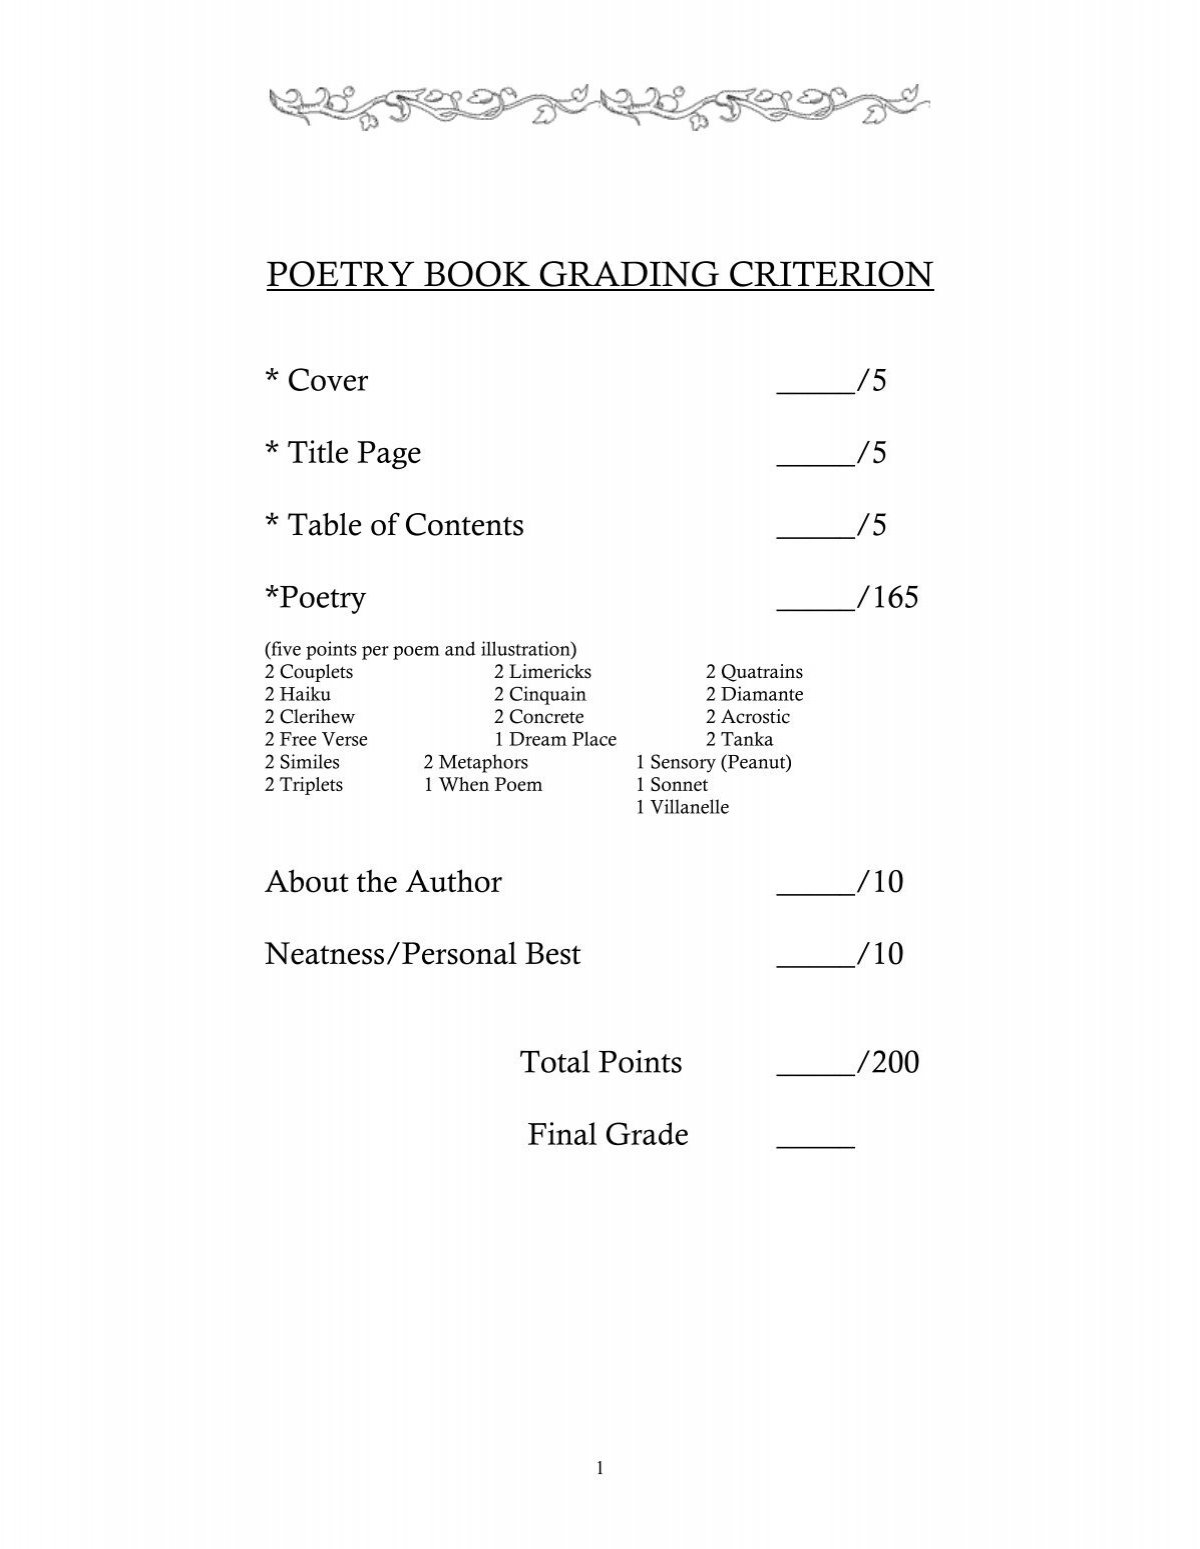 Poetry Book Grading Criterion